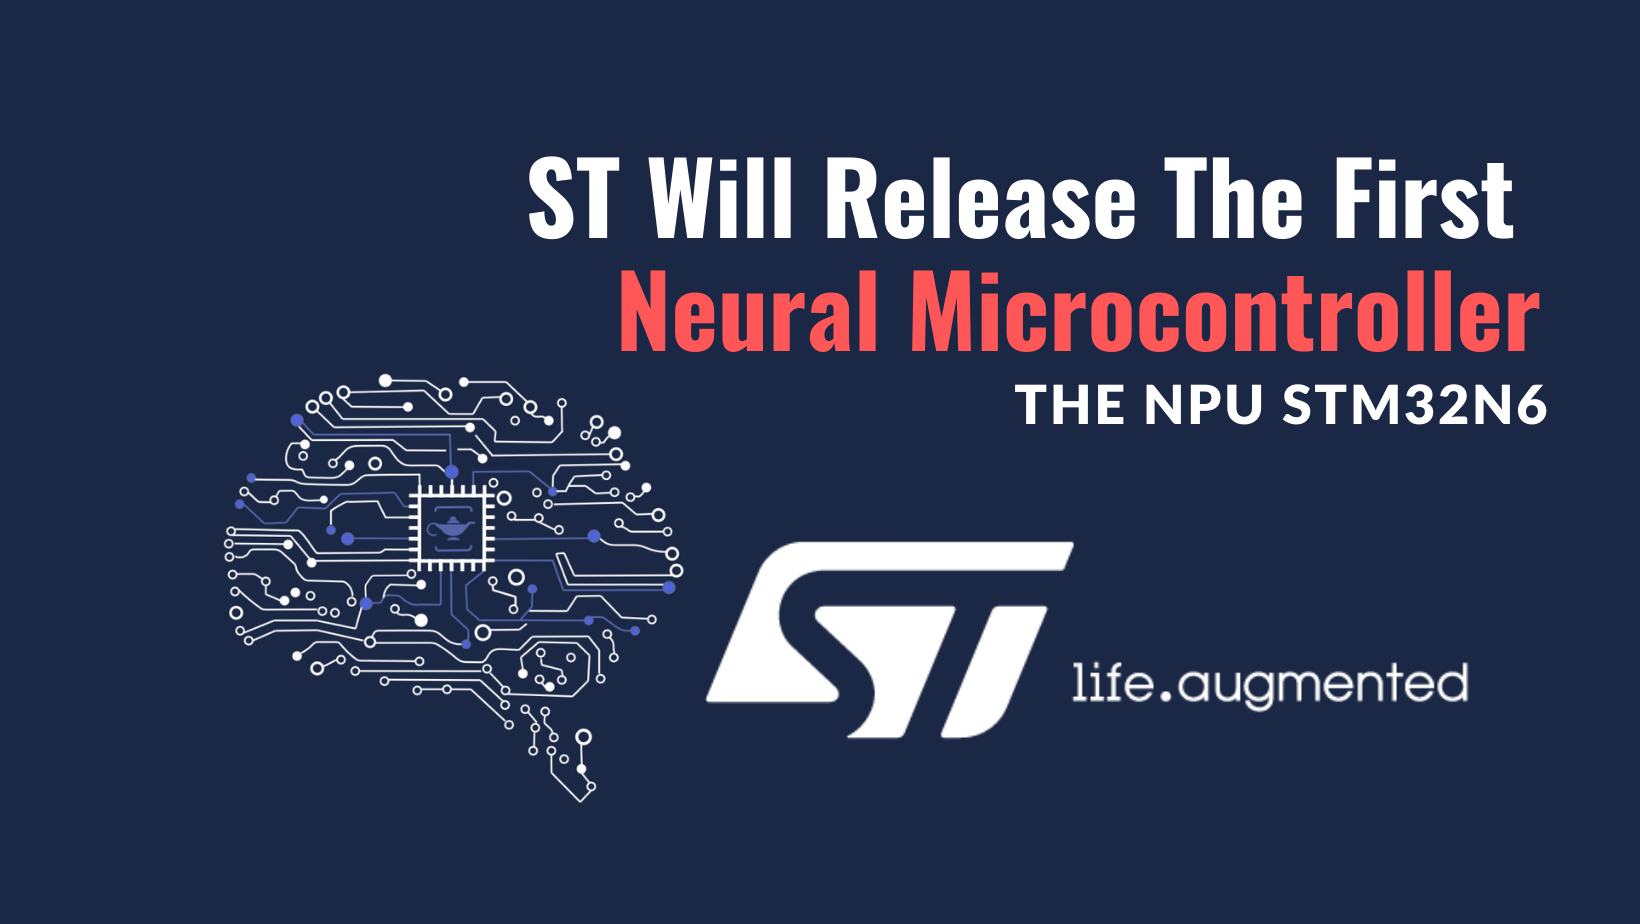 STMicroelectronics Will Release The First Neural Microcontroller, The NPU STM32N6